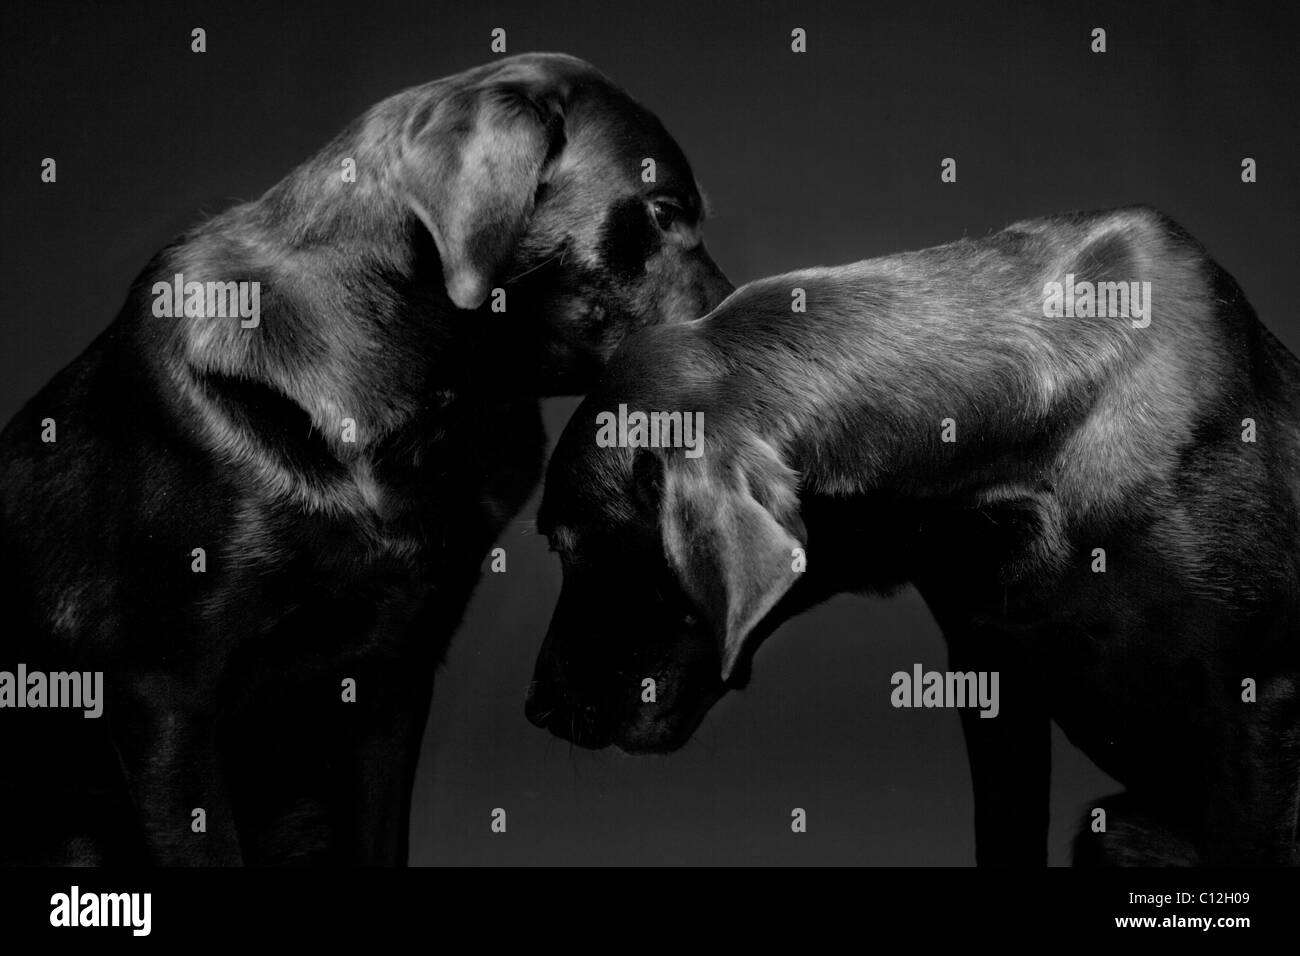 A portrait of two black labs against a black background. Stock Photo